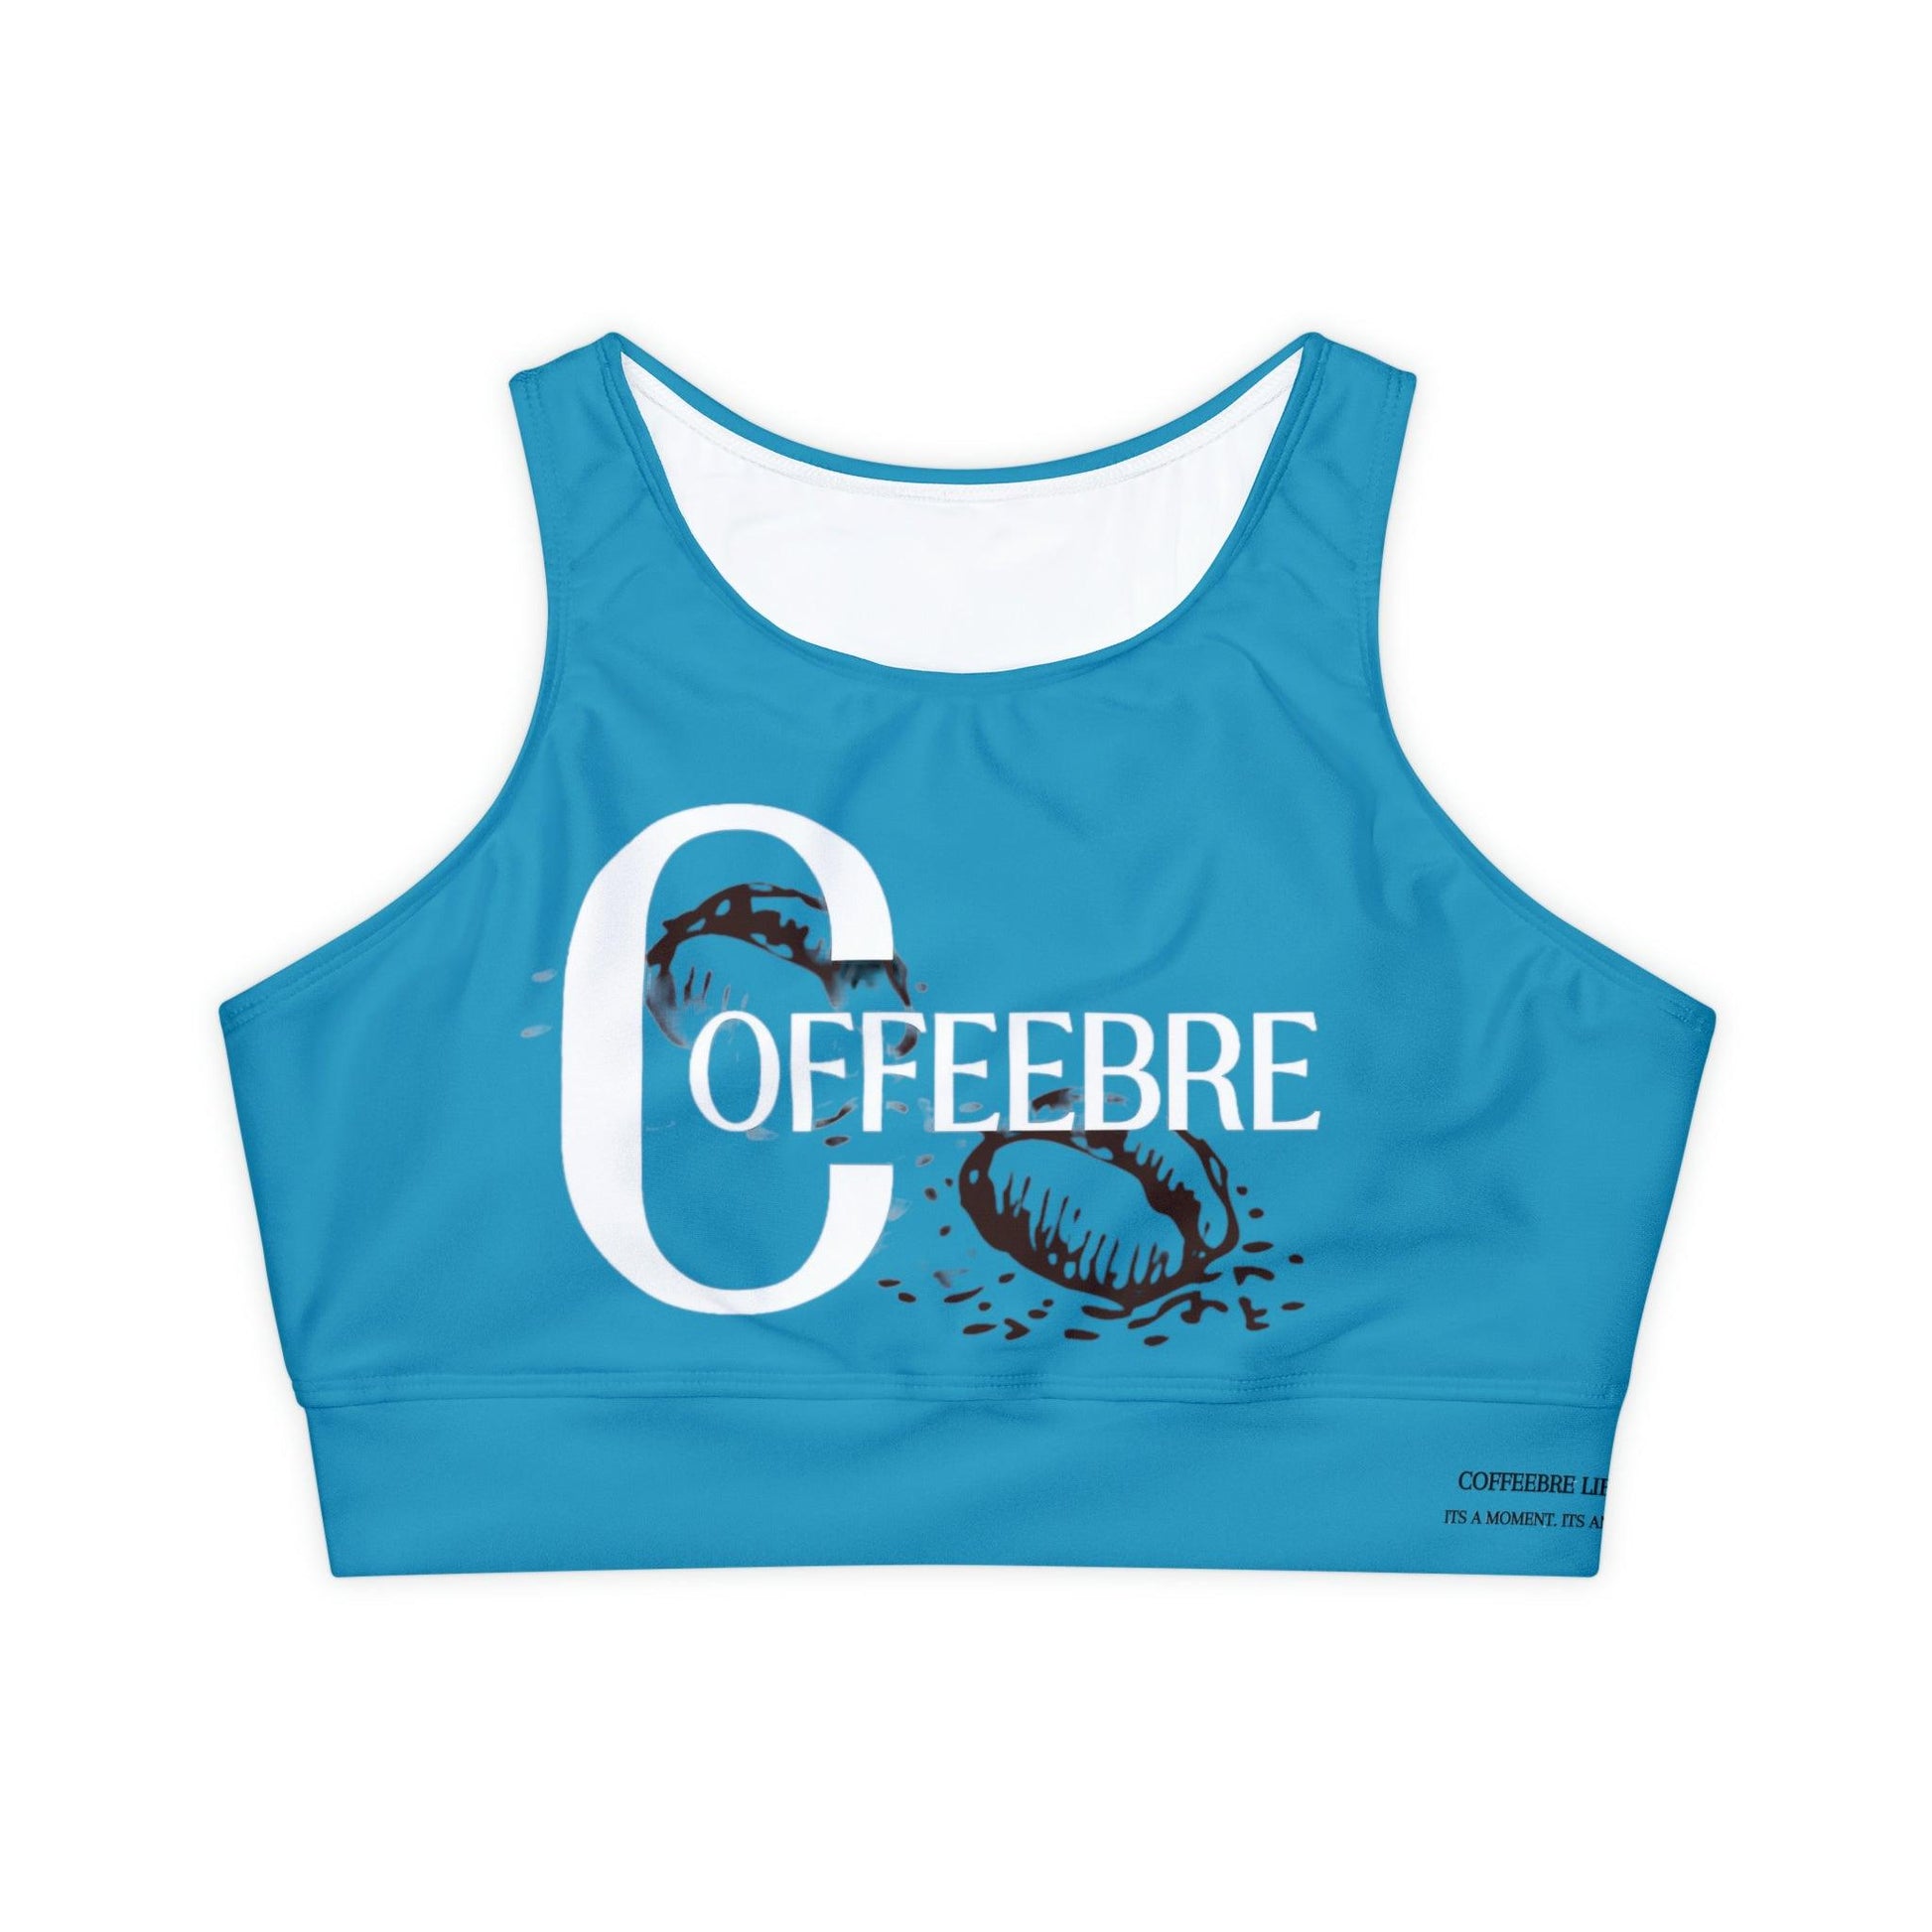 Fully Lined, Turquoise Padded Sports Bra - COFFEEBRE